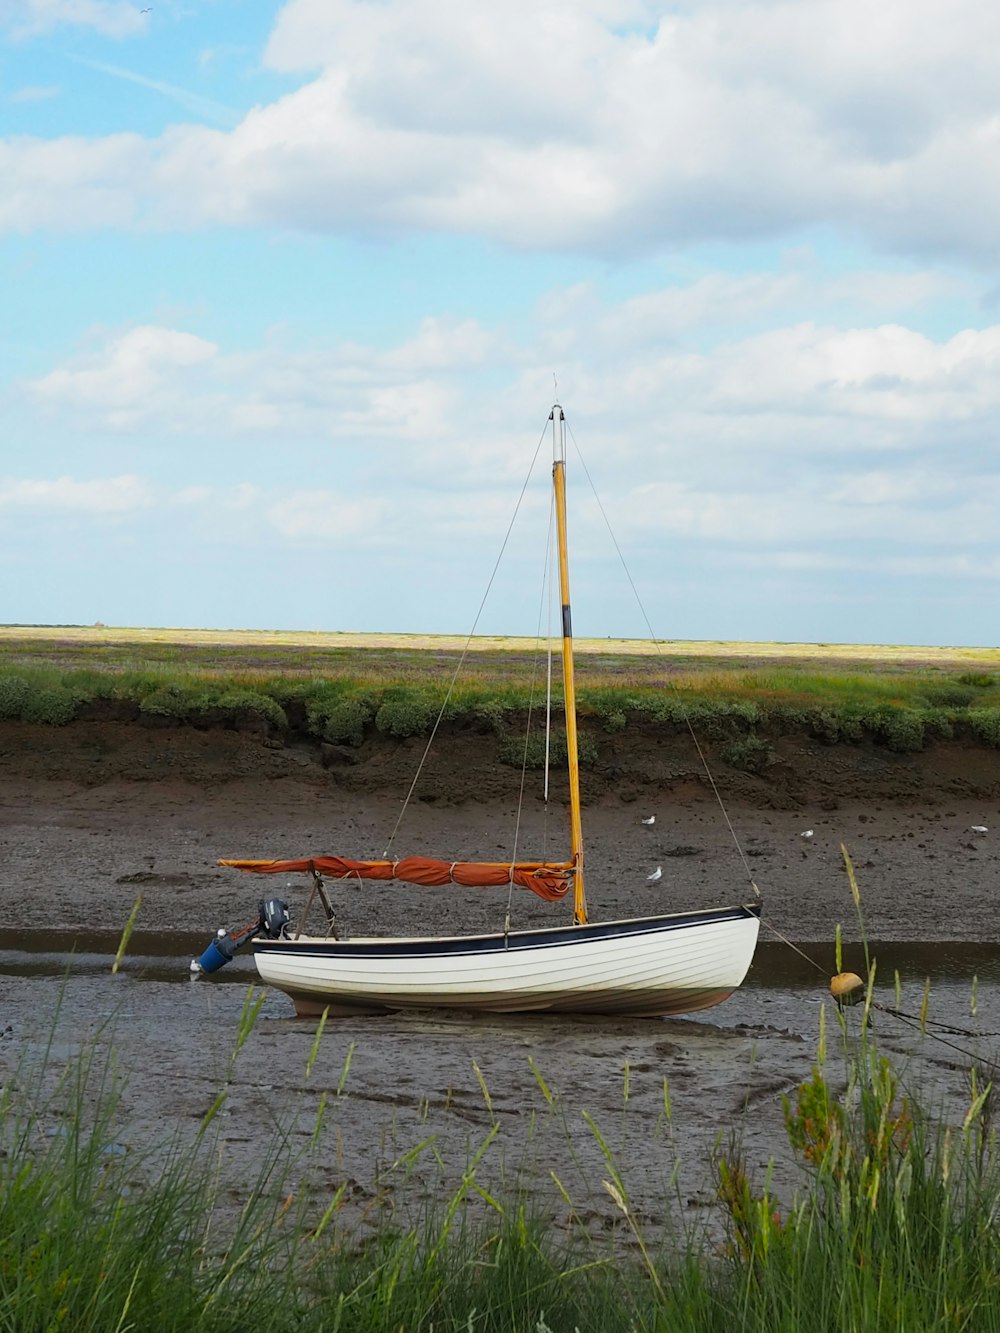 white and blue boat on brown sand under white cloudy sky during daytime